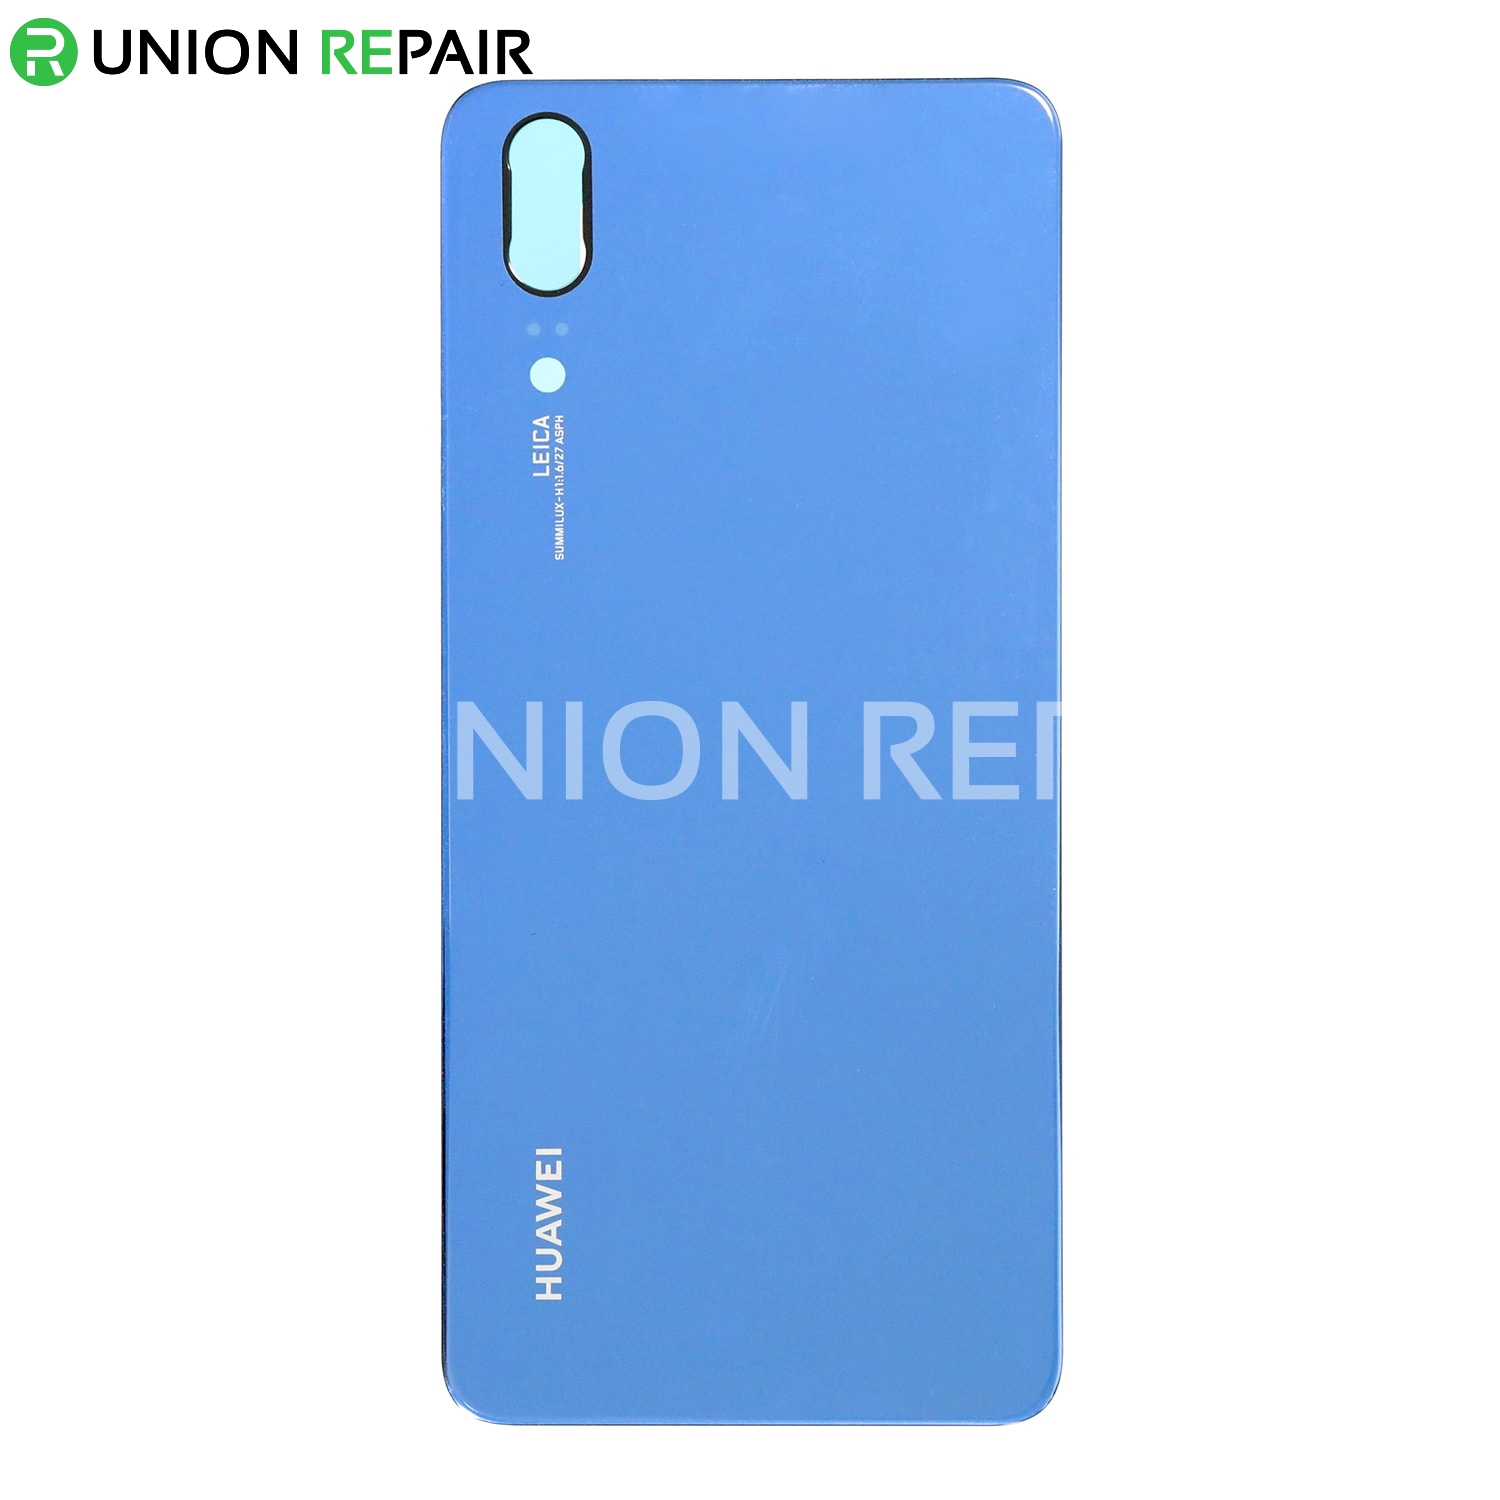 Replacement for Huawei P20 Battery Door - Midnight Blue